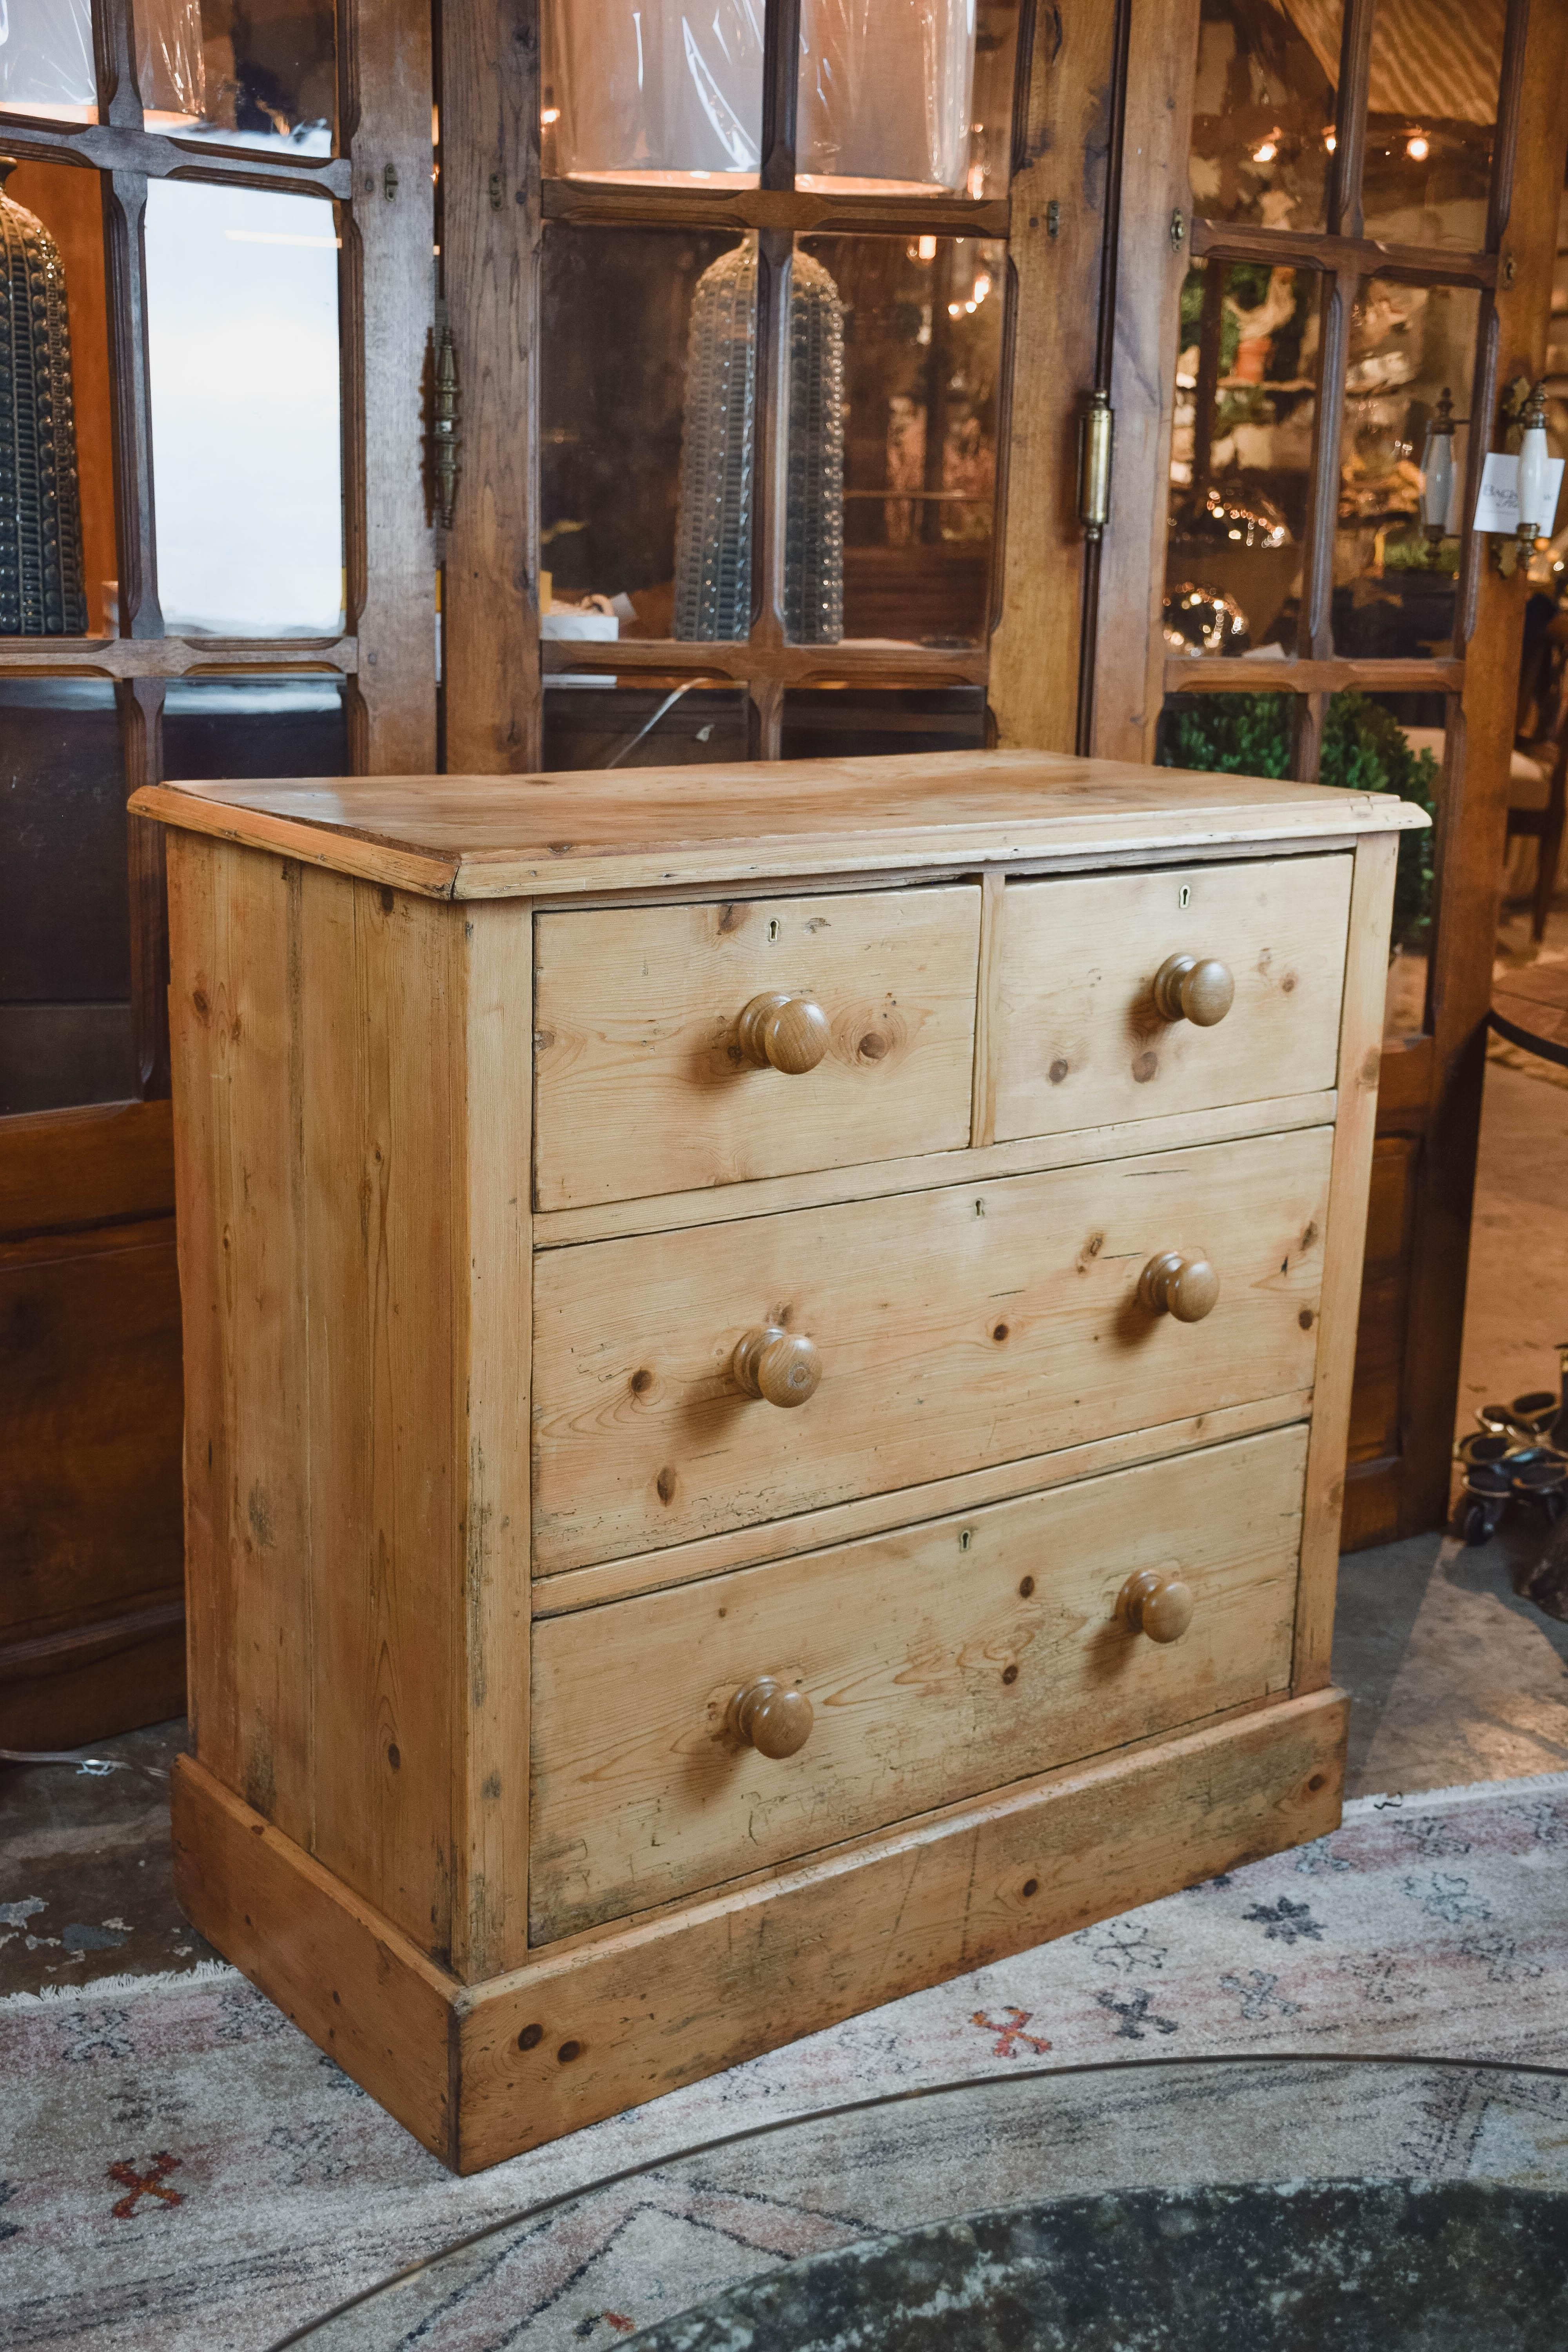 Found in the English countryside, this Victorian pine chest from England has a beveled edge around the top, a two-drawer over two-drawer configuration, wood knobs and an apron around the bottom.